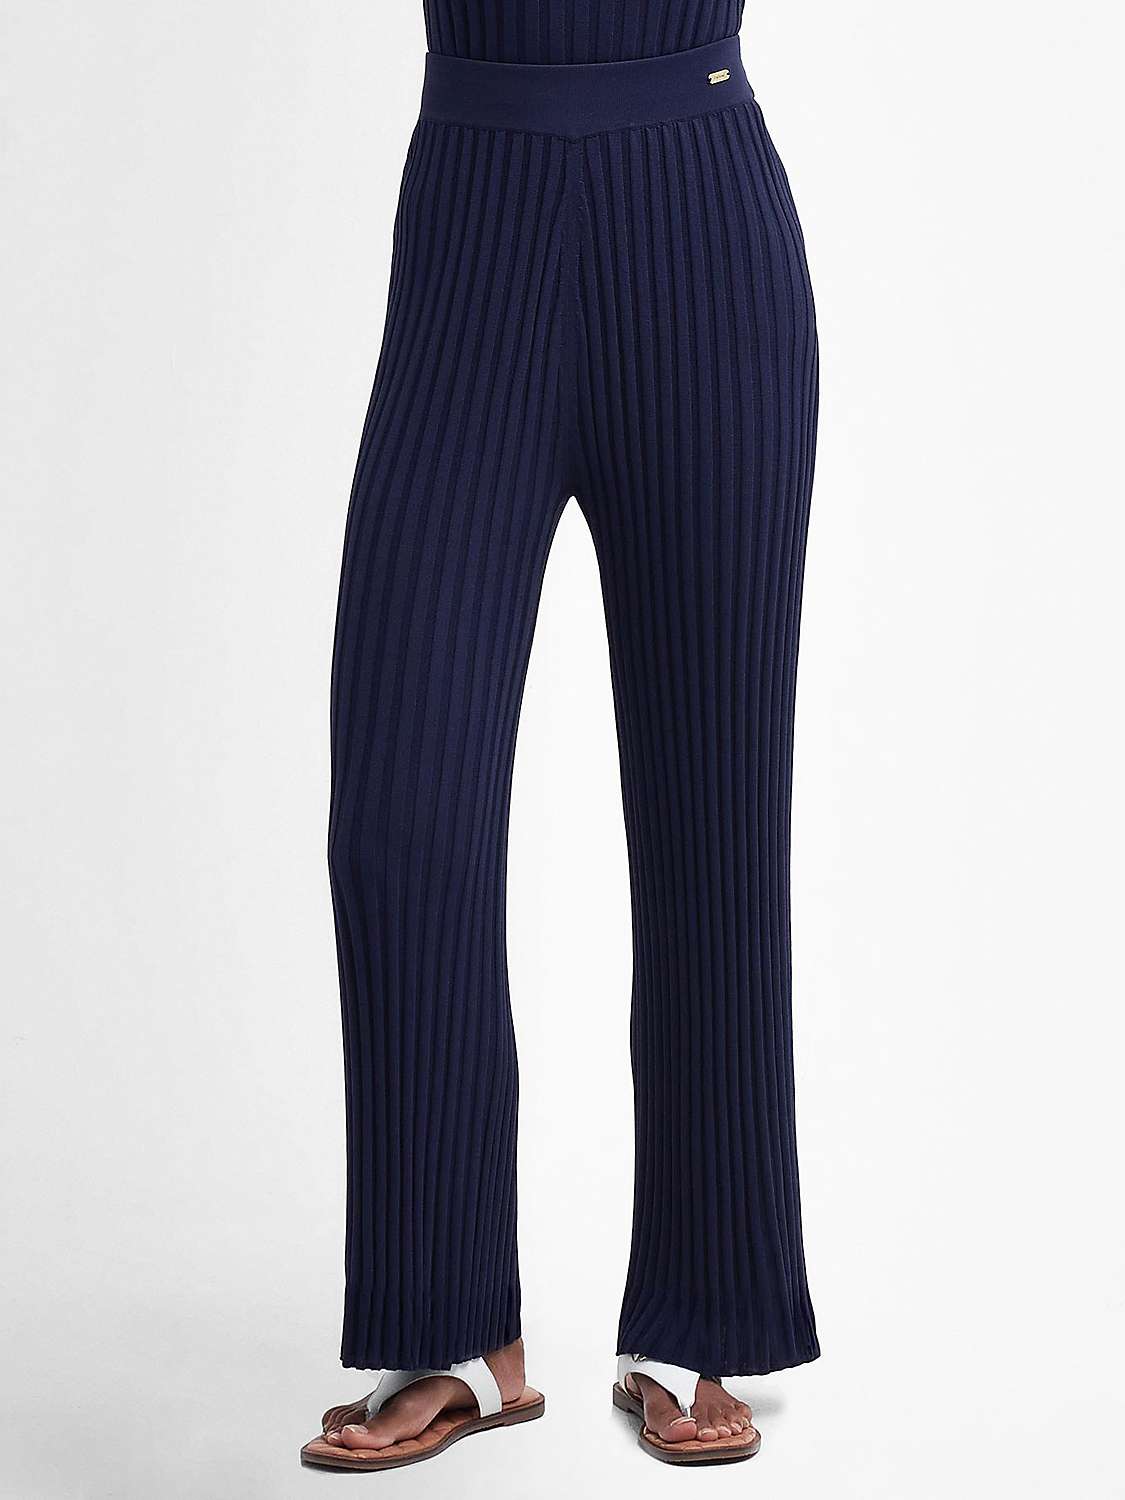 Buy Barbour Julia Wide Leg Knit Trousers, Navy Online at johnlewis.com